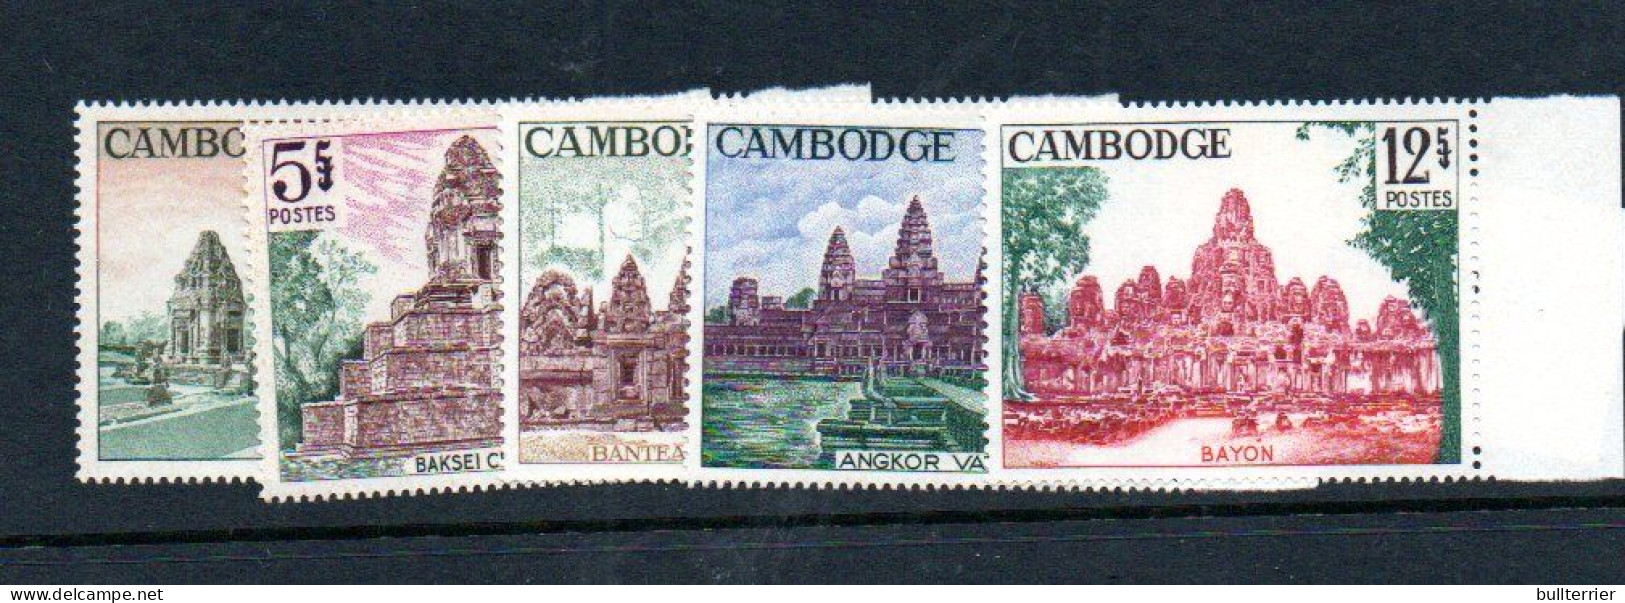 CAMBODIA - 1966 - TEMPLES SET OF 6  MINT NEVER HINGED - Cambodia